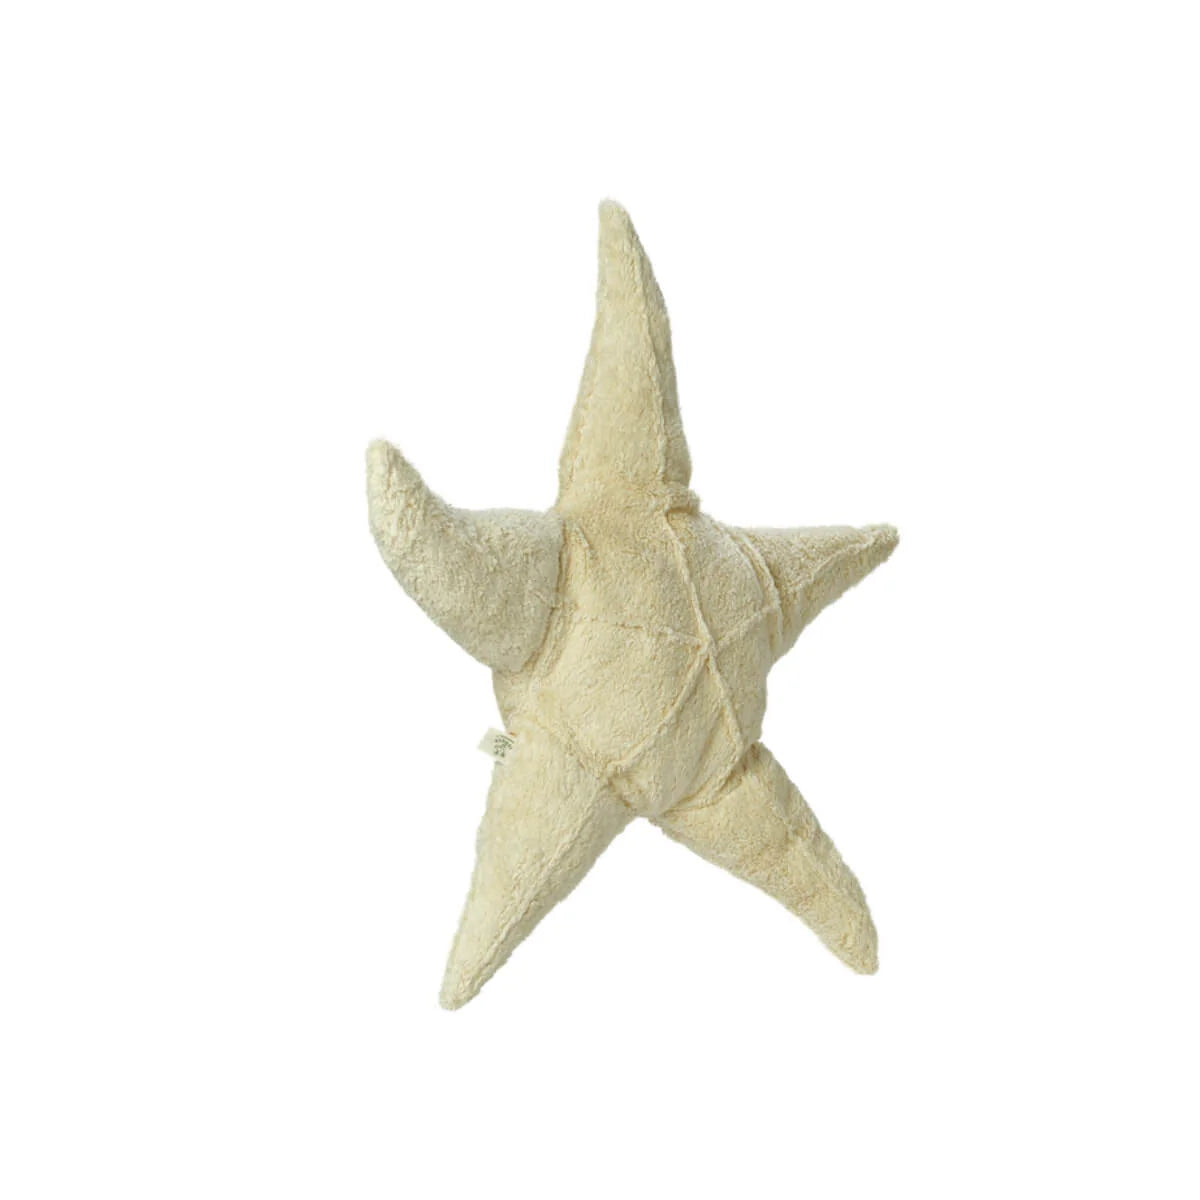 SENGER Cuddly Animal - Starfish Small w removable Heat/Cool Pack